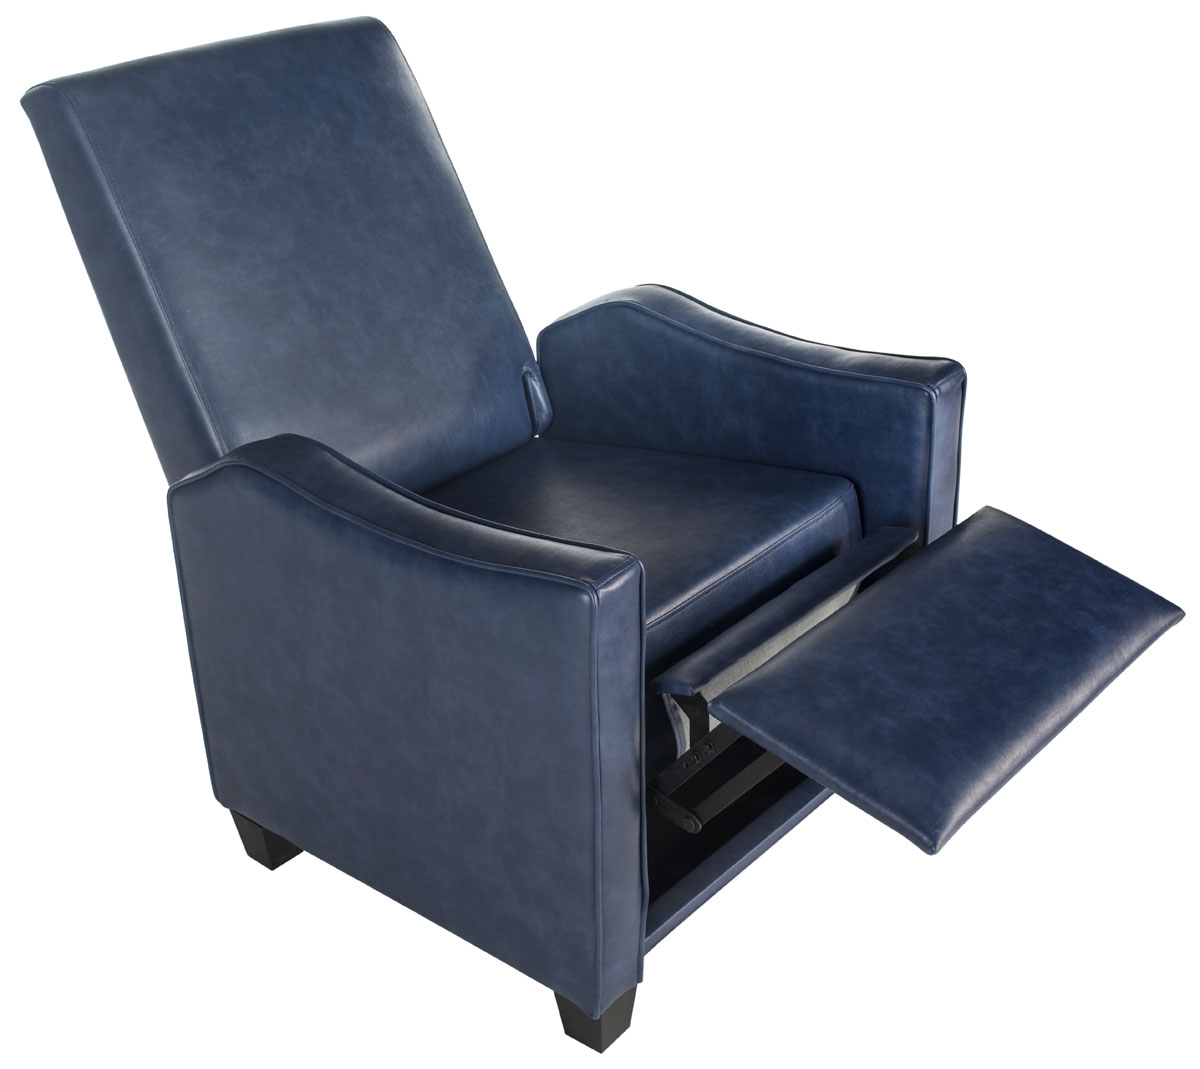 Holden Recliner Chair - Navy/Black - Arlo Home - Image 0